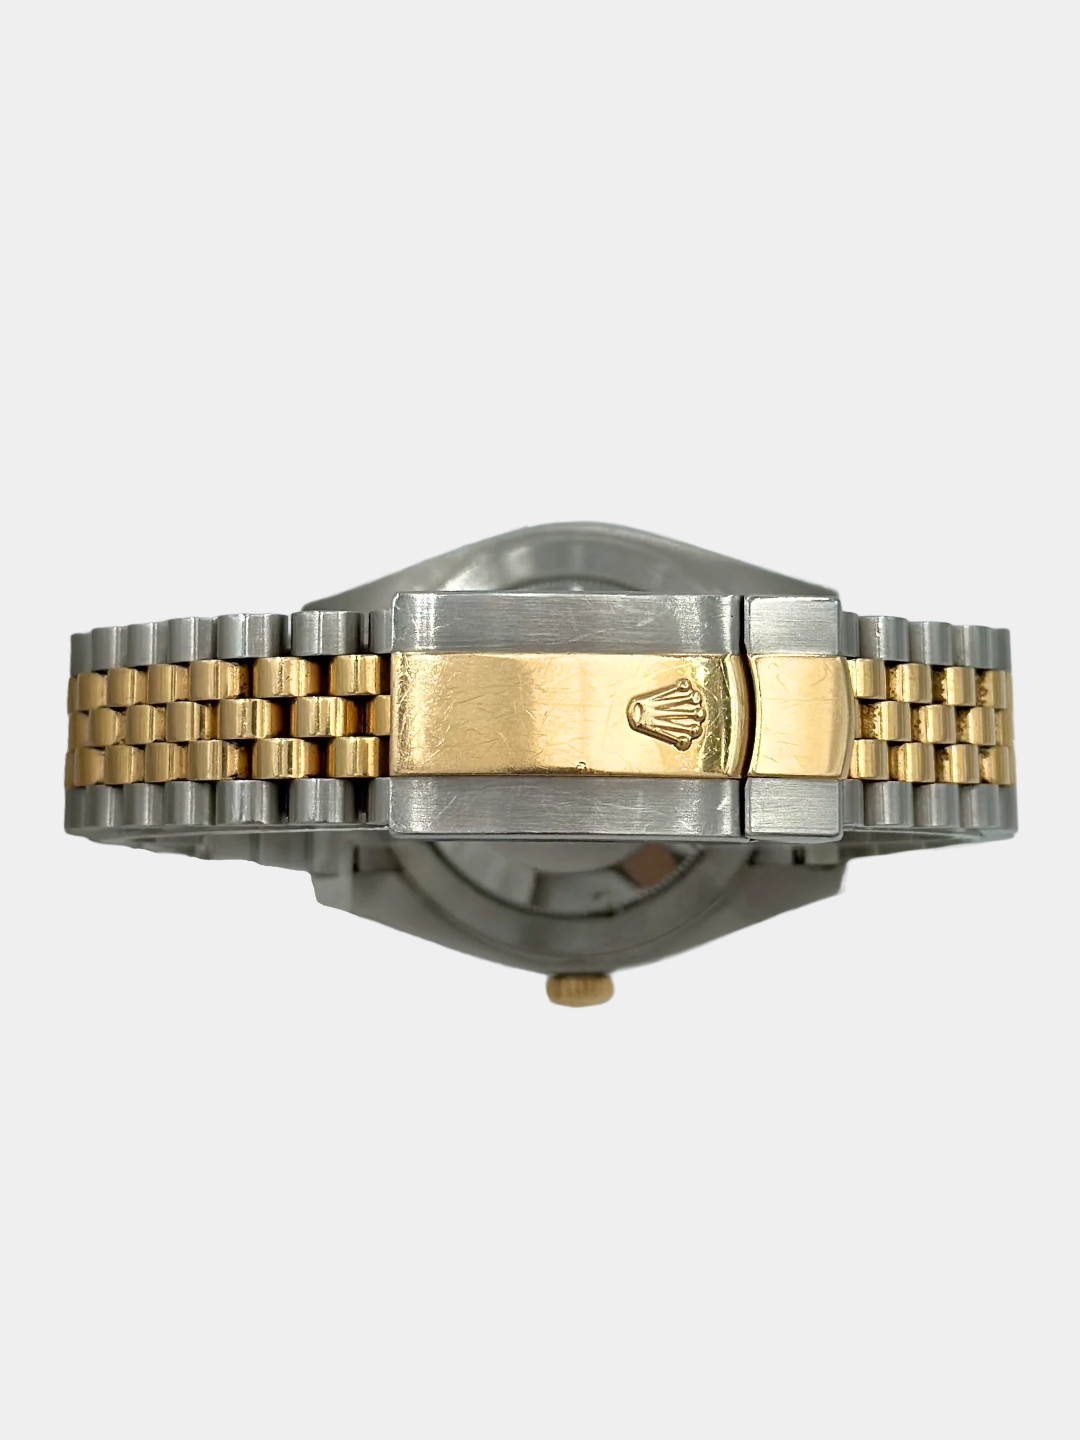 DATEJUST TWO TONE 126333